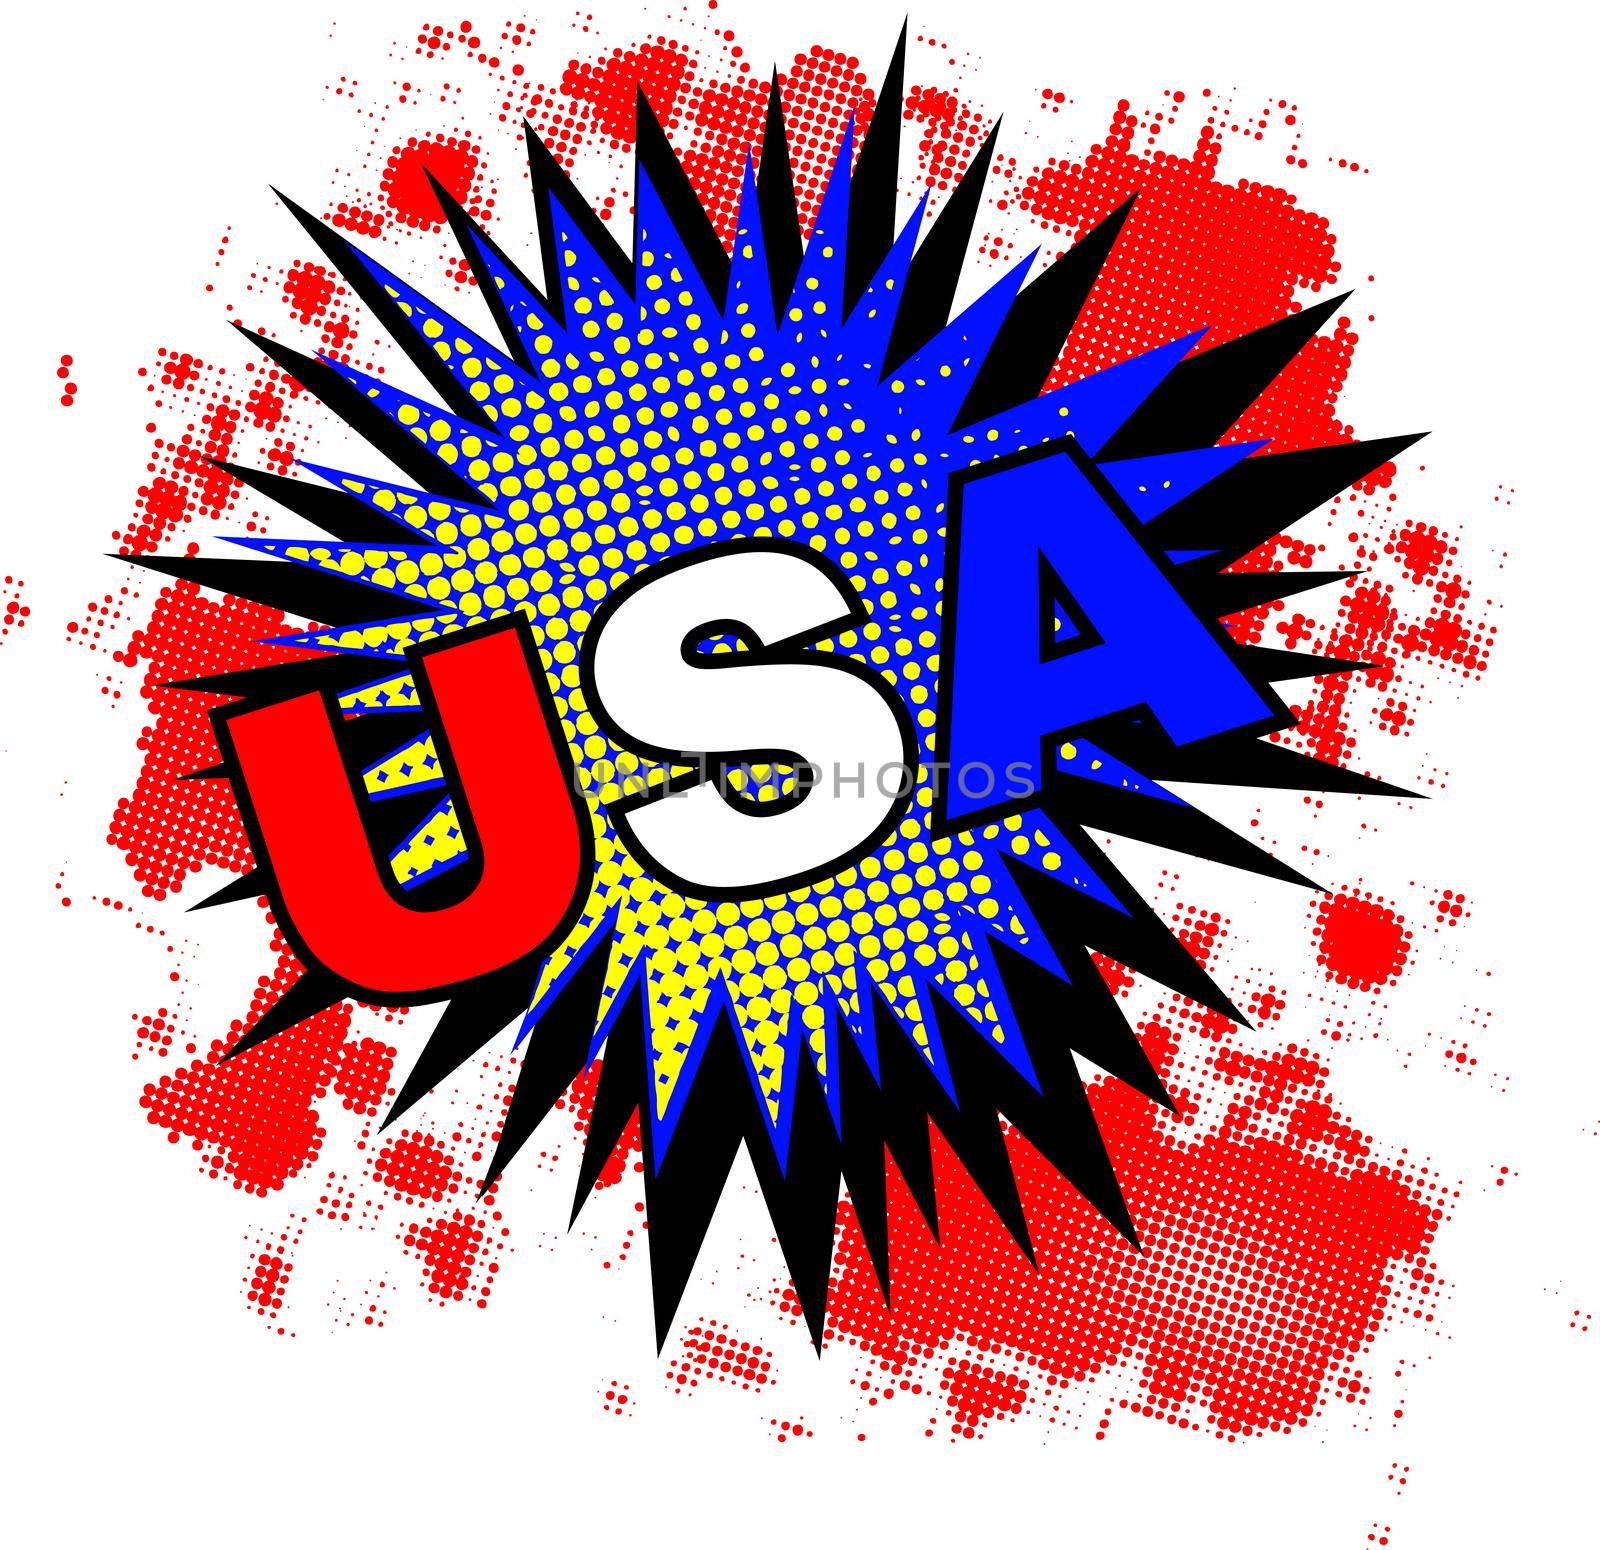 A comic cartoon style USAexclamation explosion in red white and blue over a white background